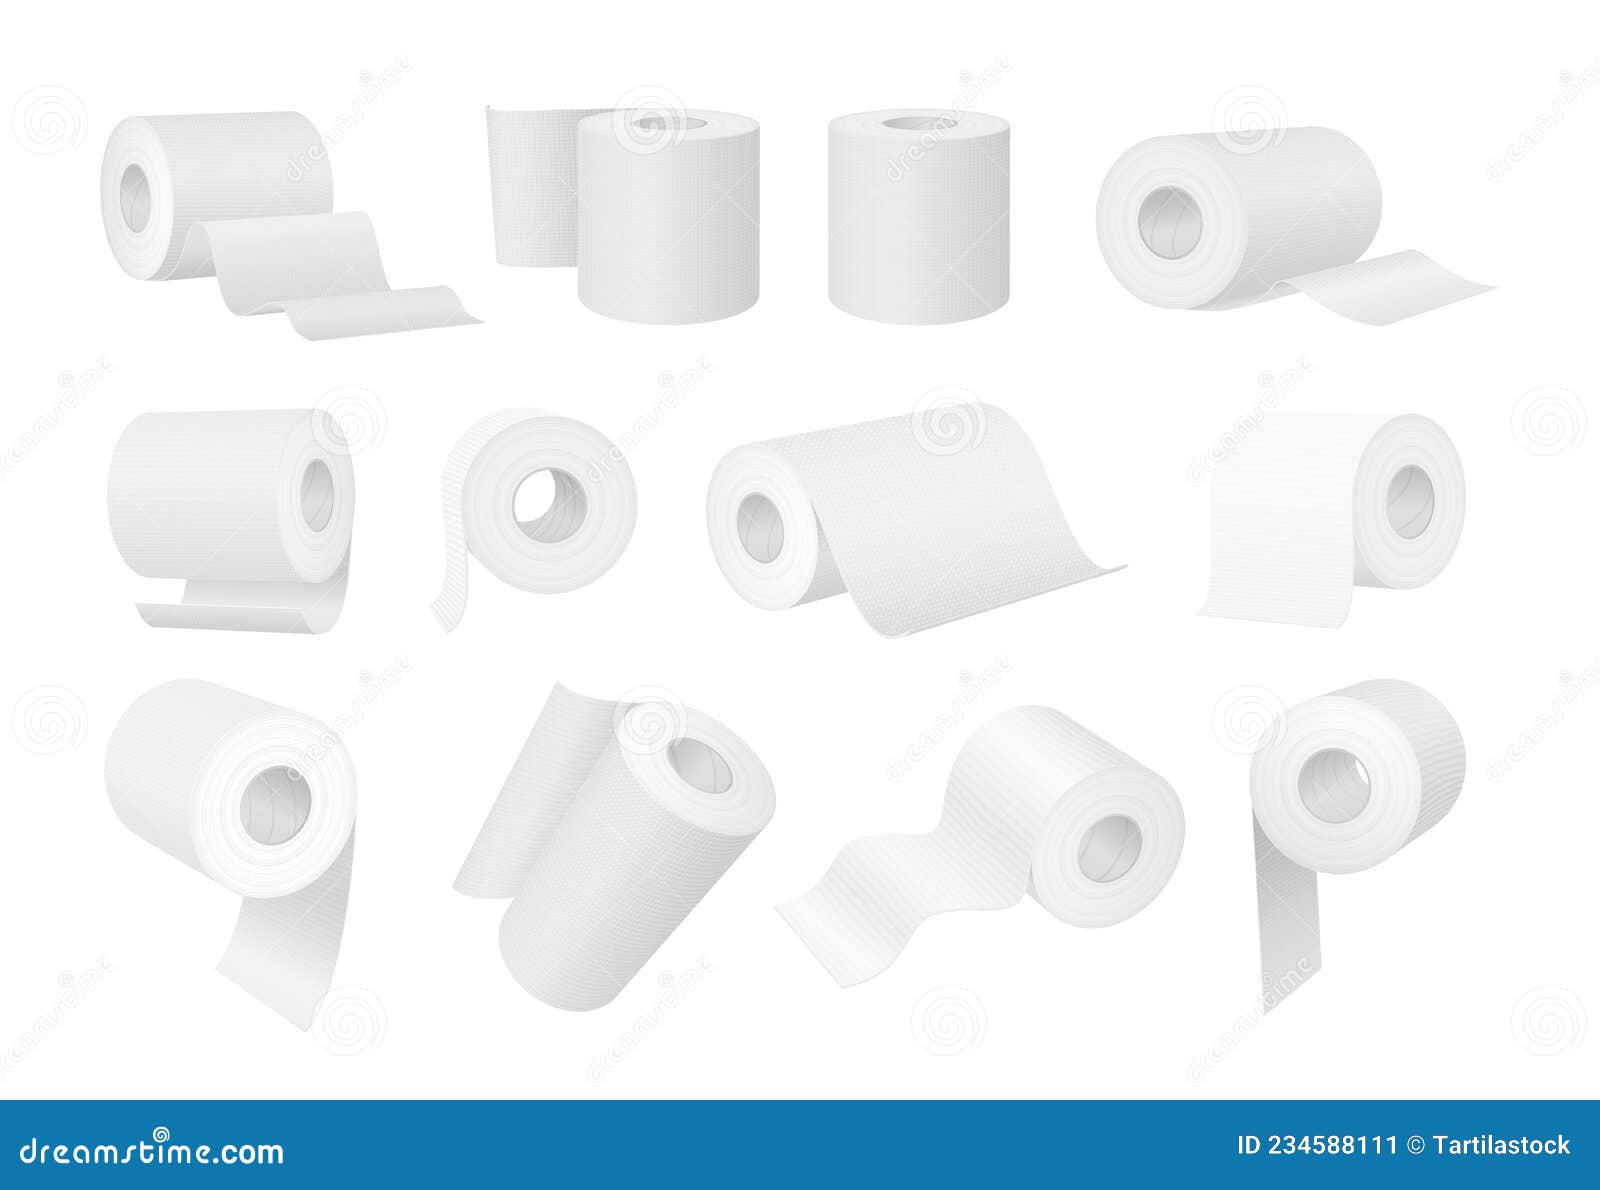 Realistic White Toilet Paper and Kitchen Towel Rolls. 3d Cylinder ...